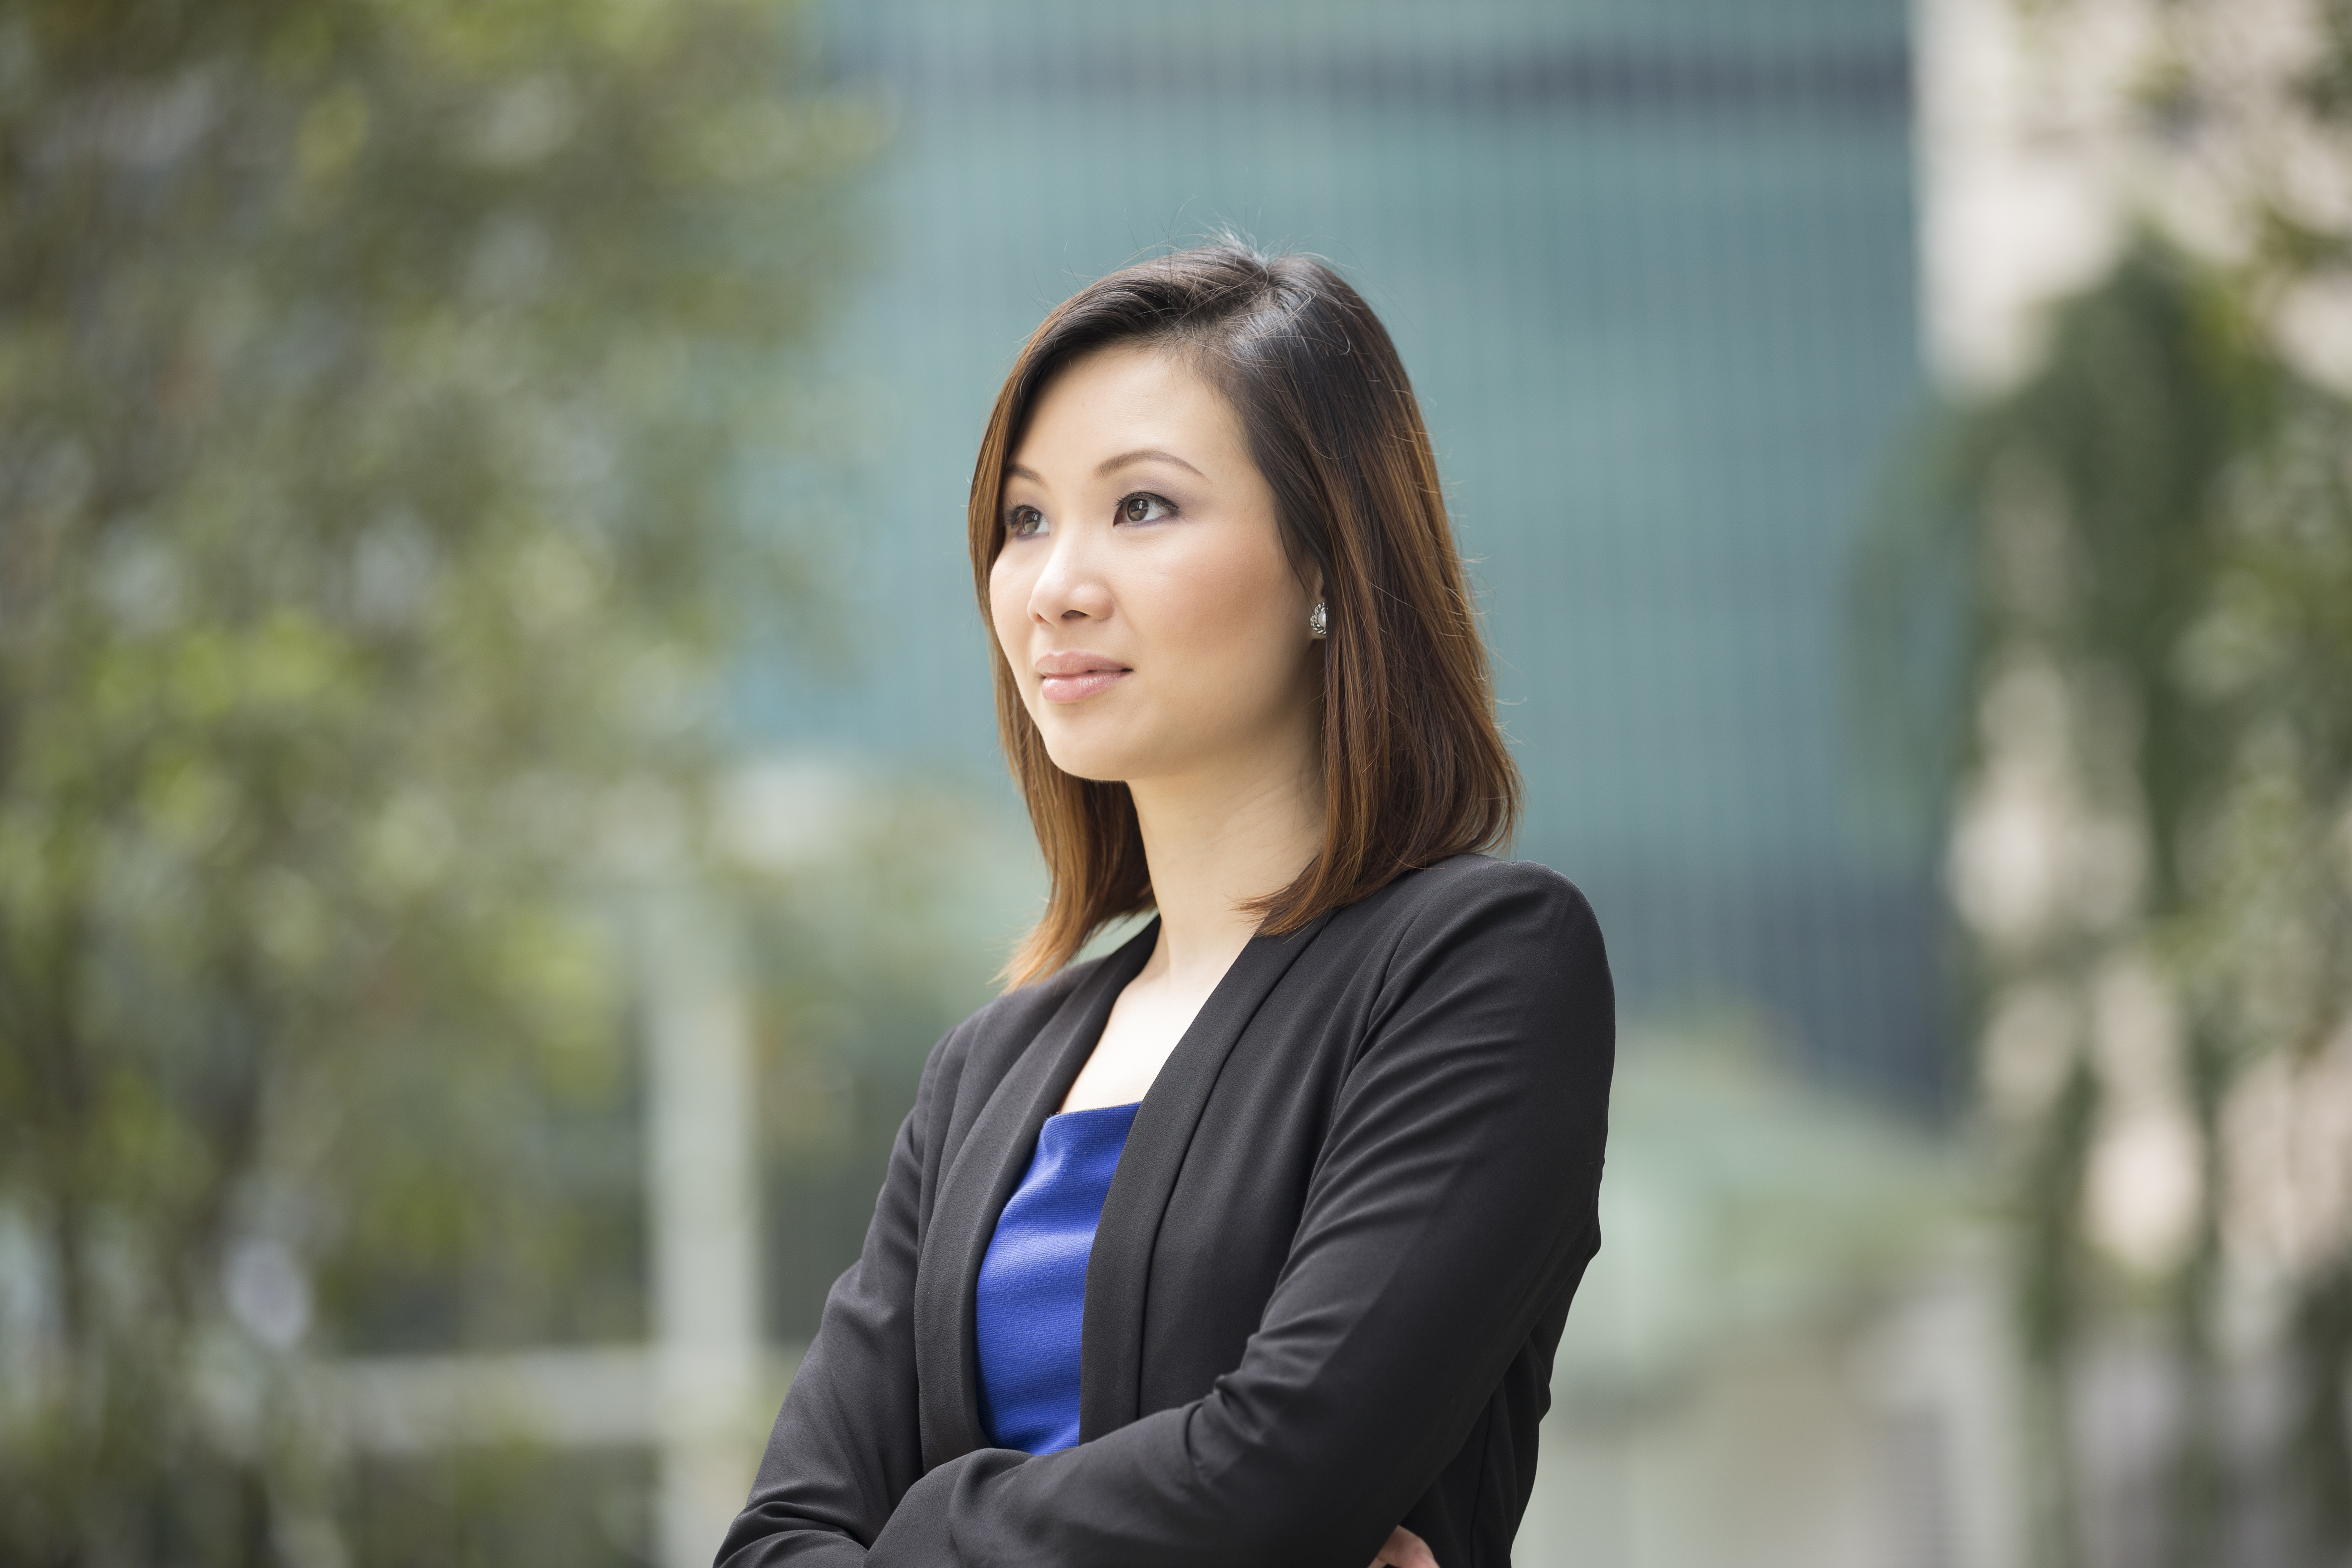 Portrait of thoughtful Chinese businesswoman looking away. Asian business woman in smart business suitstanding outside in modern city.